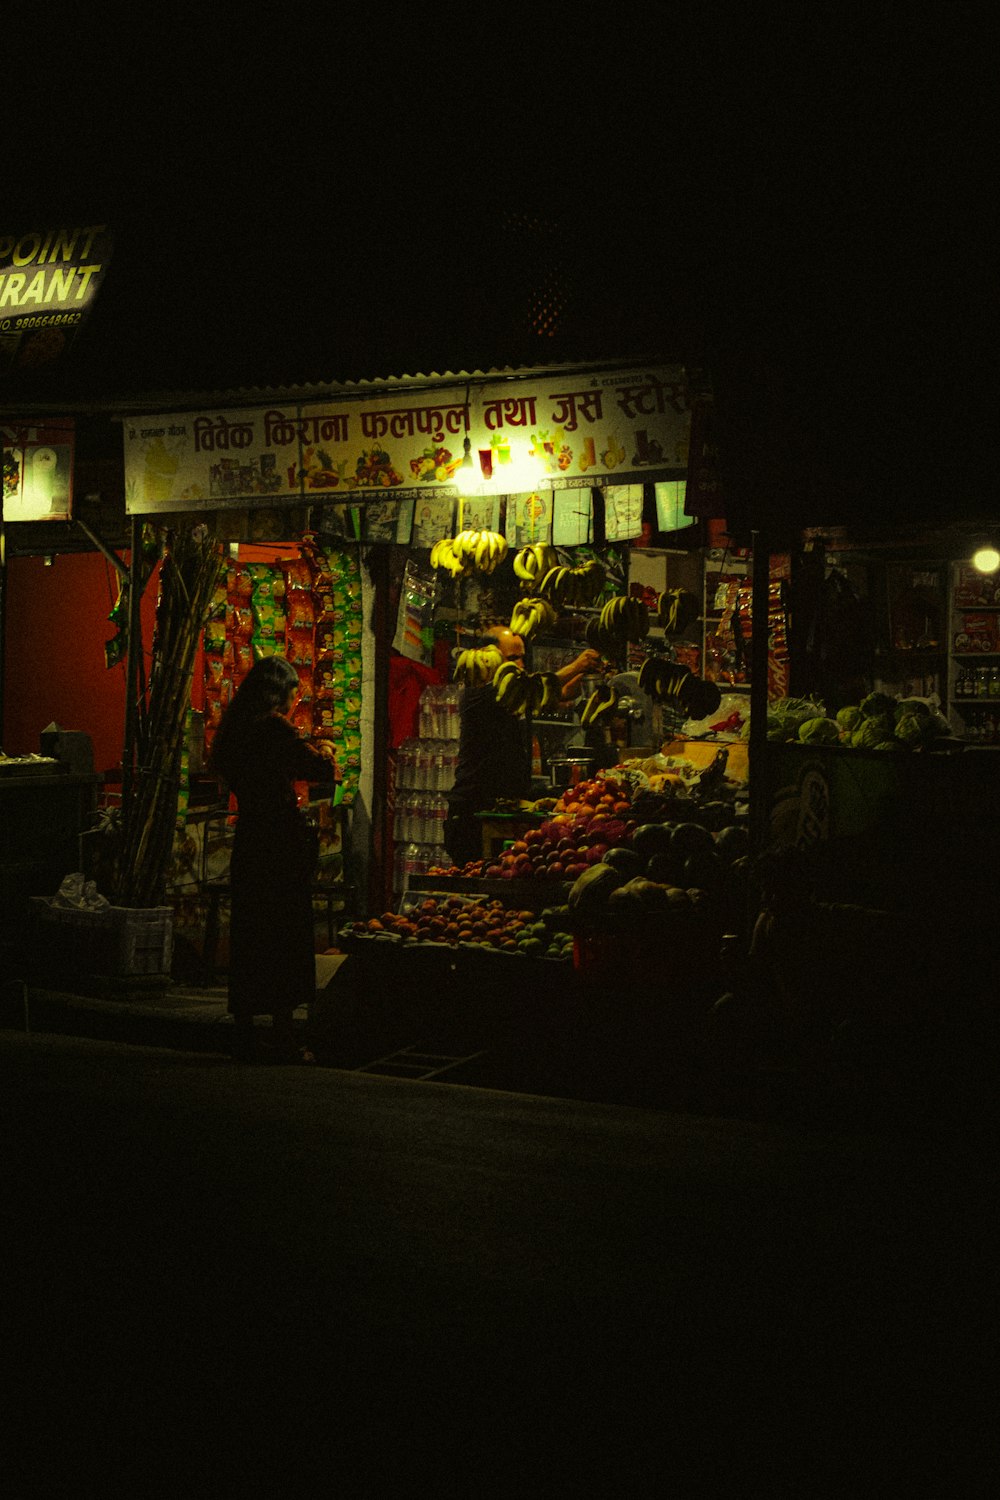 a person standing in front of a fruit stand at night